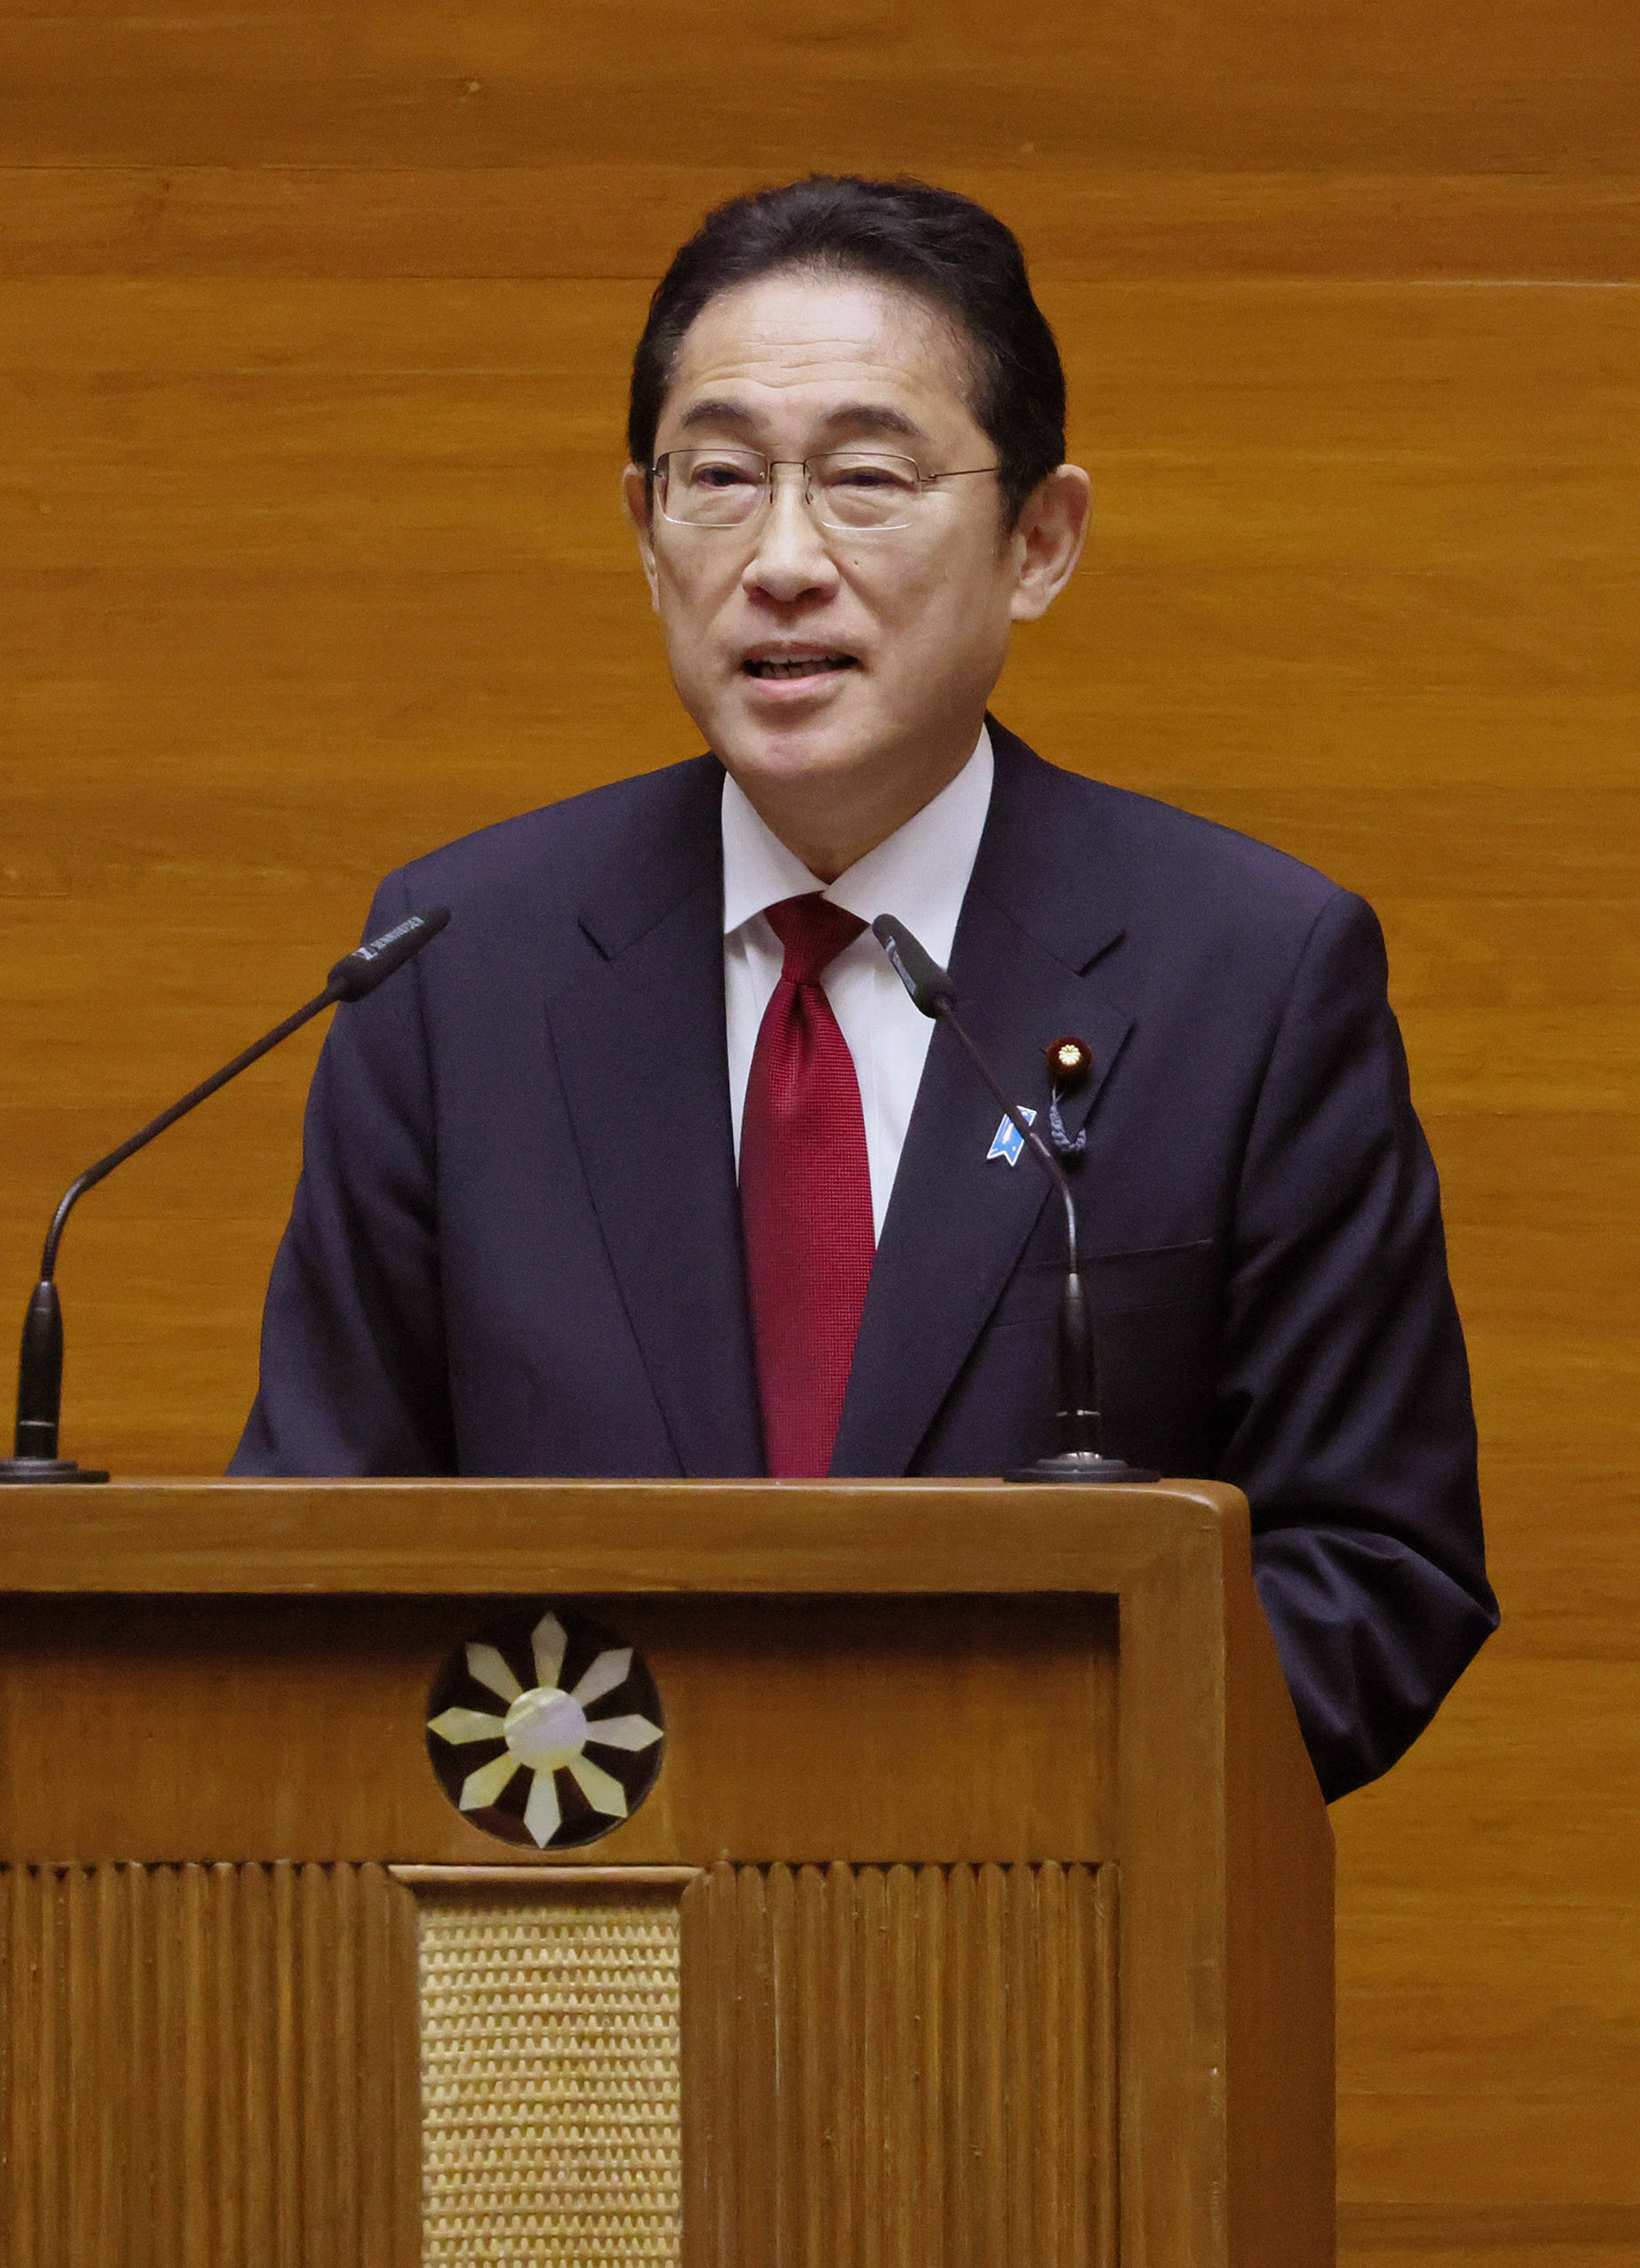 Prime Minister Kishida delivering a policy speech at the Joint Session of the Philippine Senate and House of Representatives (2)